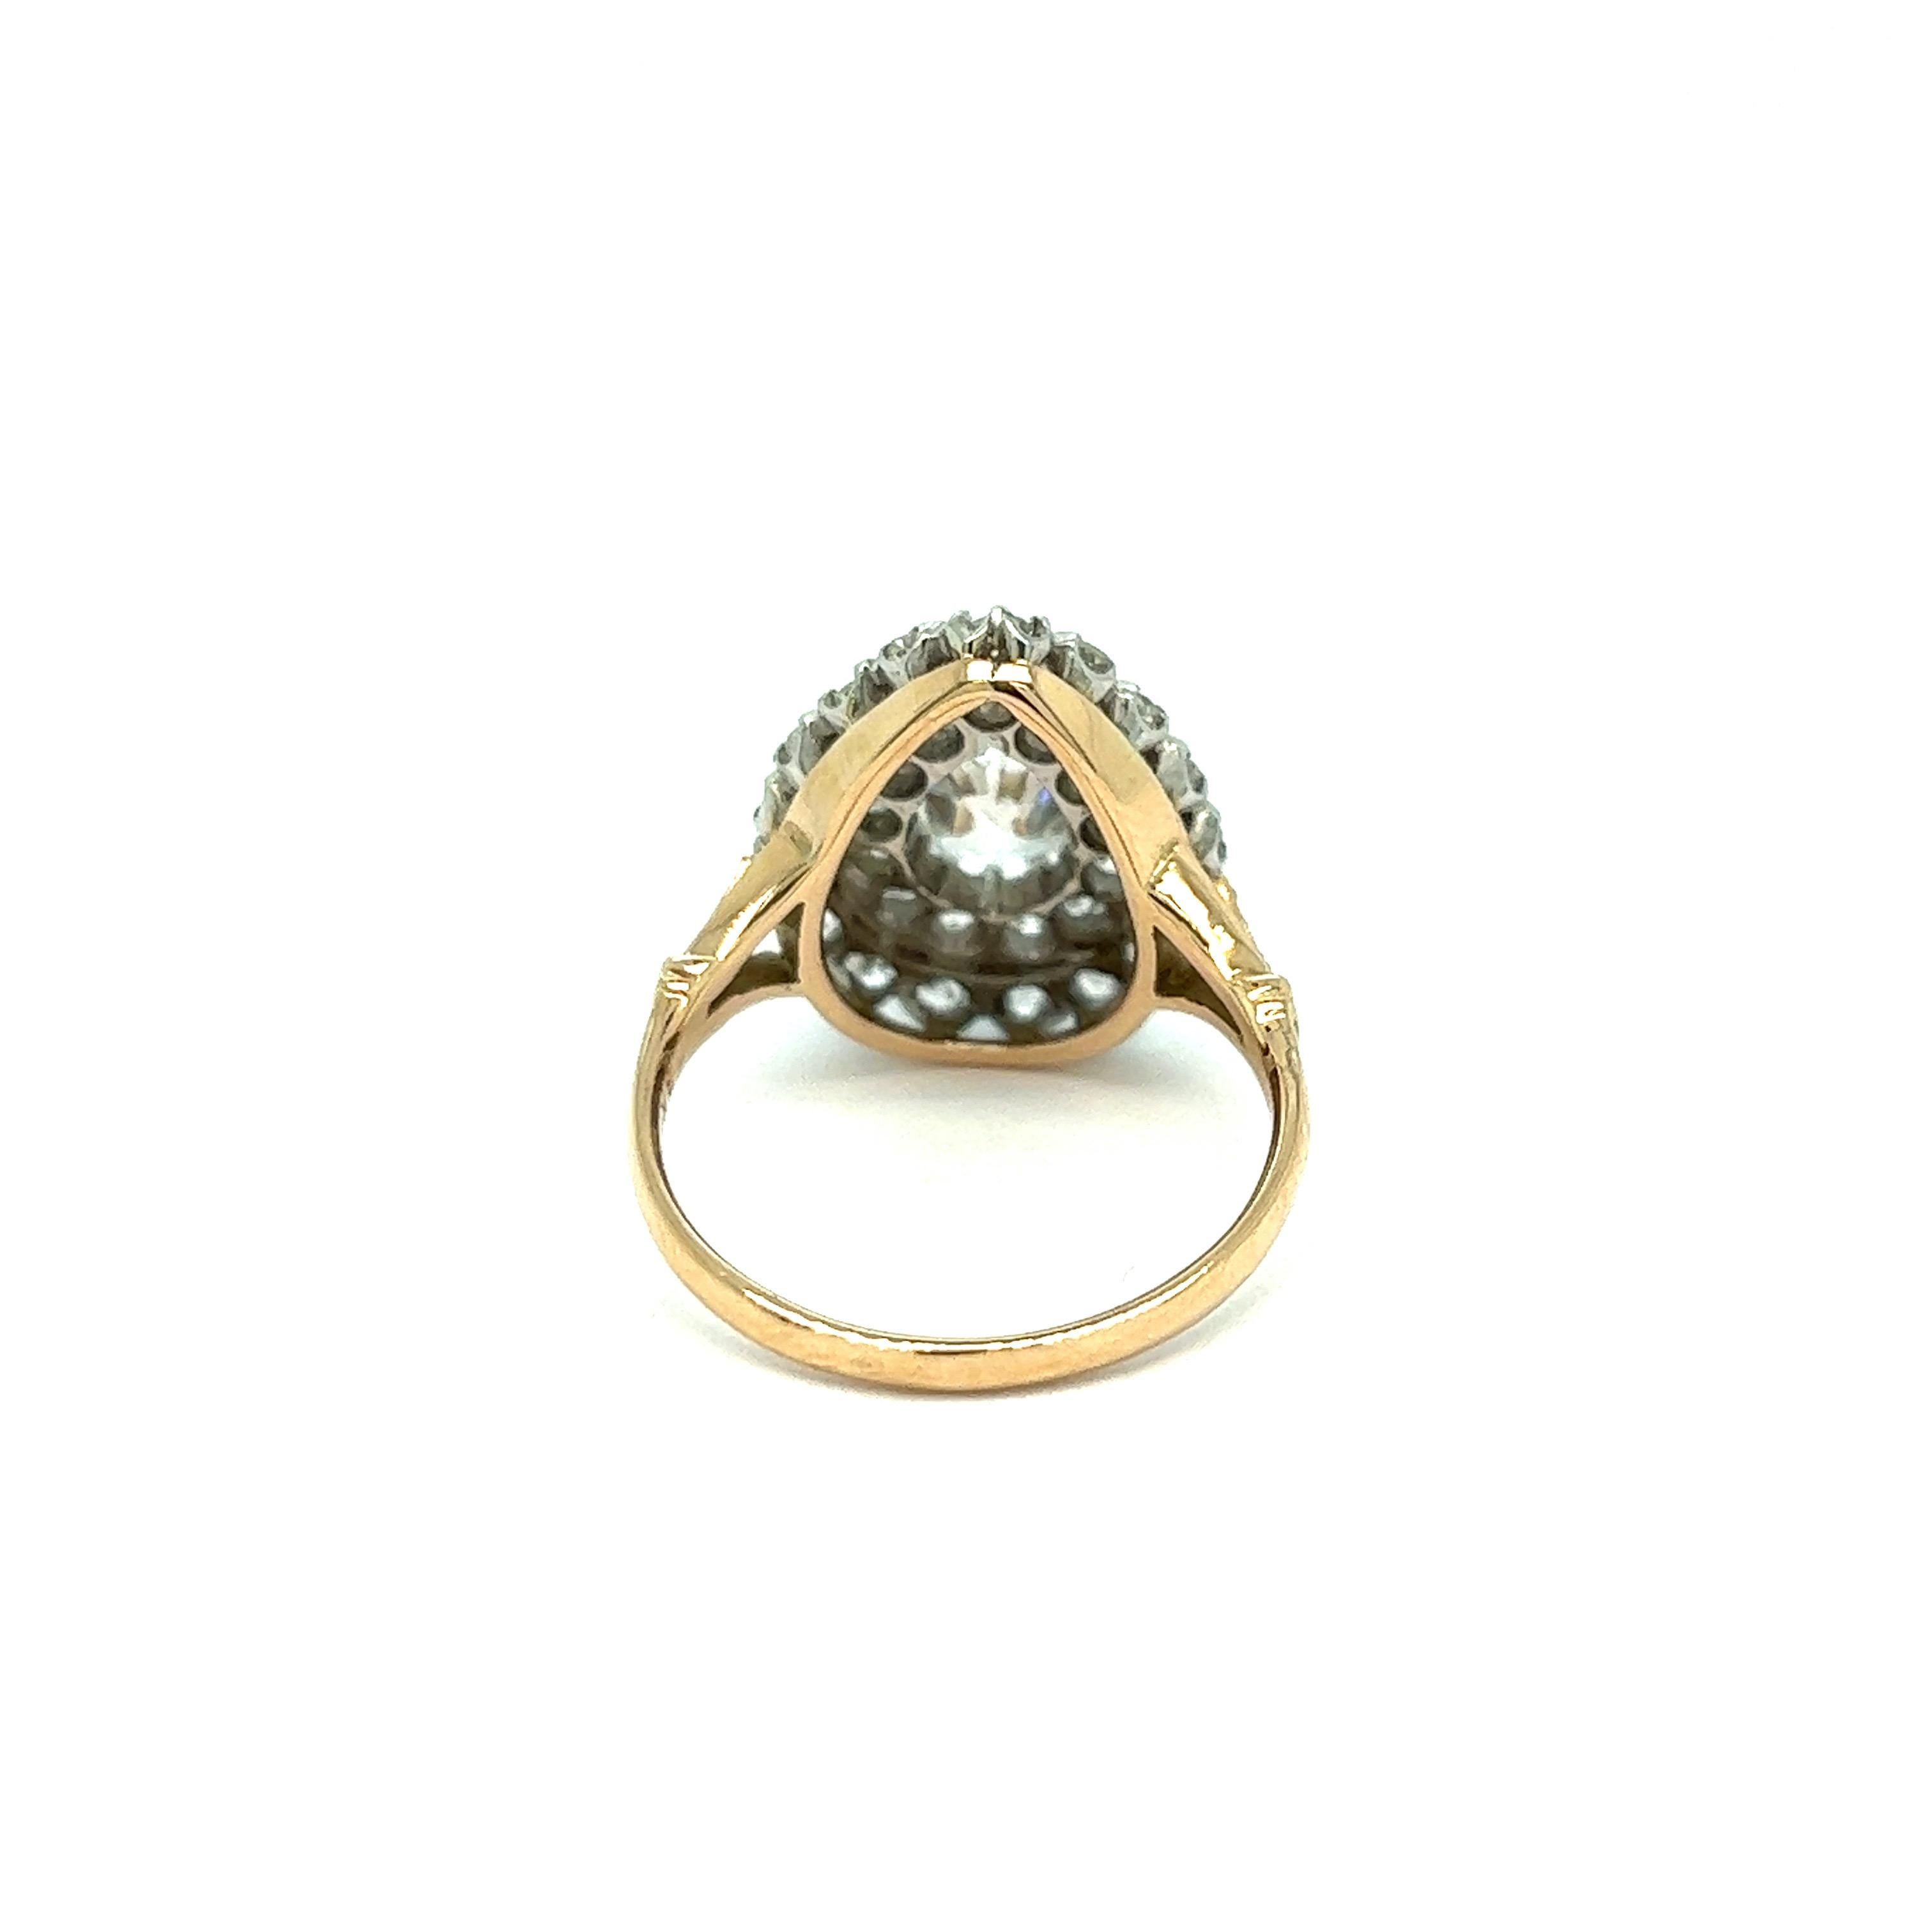 Antique Gold Platinum Diamond Ring In Excellent Condition For Sale In New York, NY